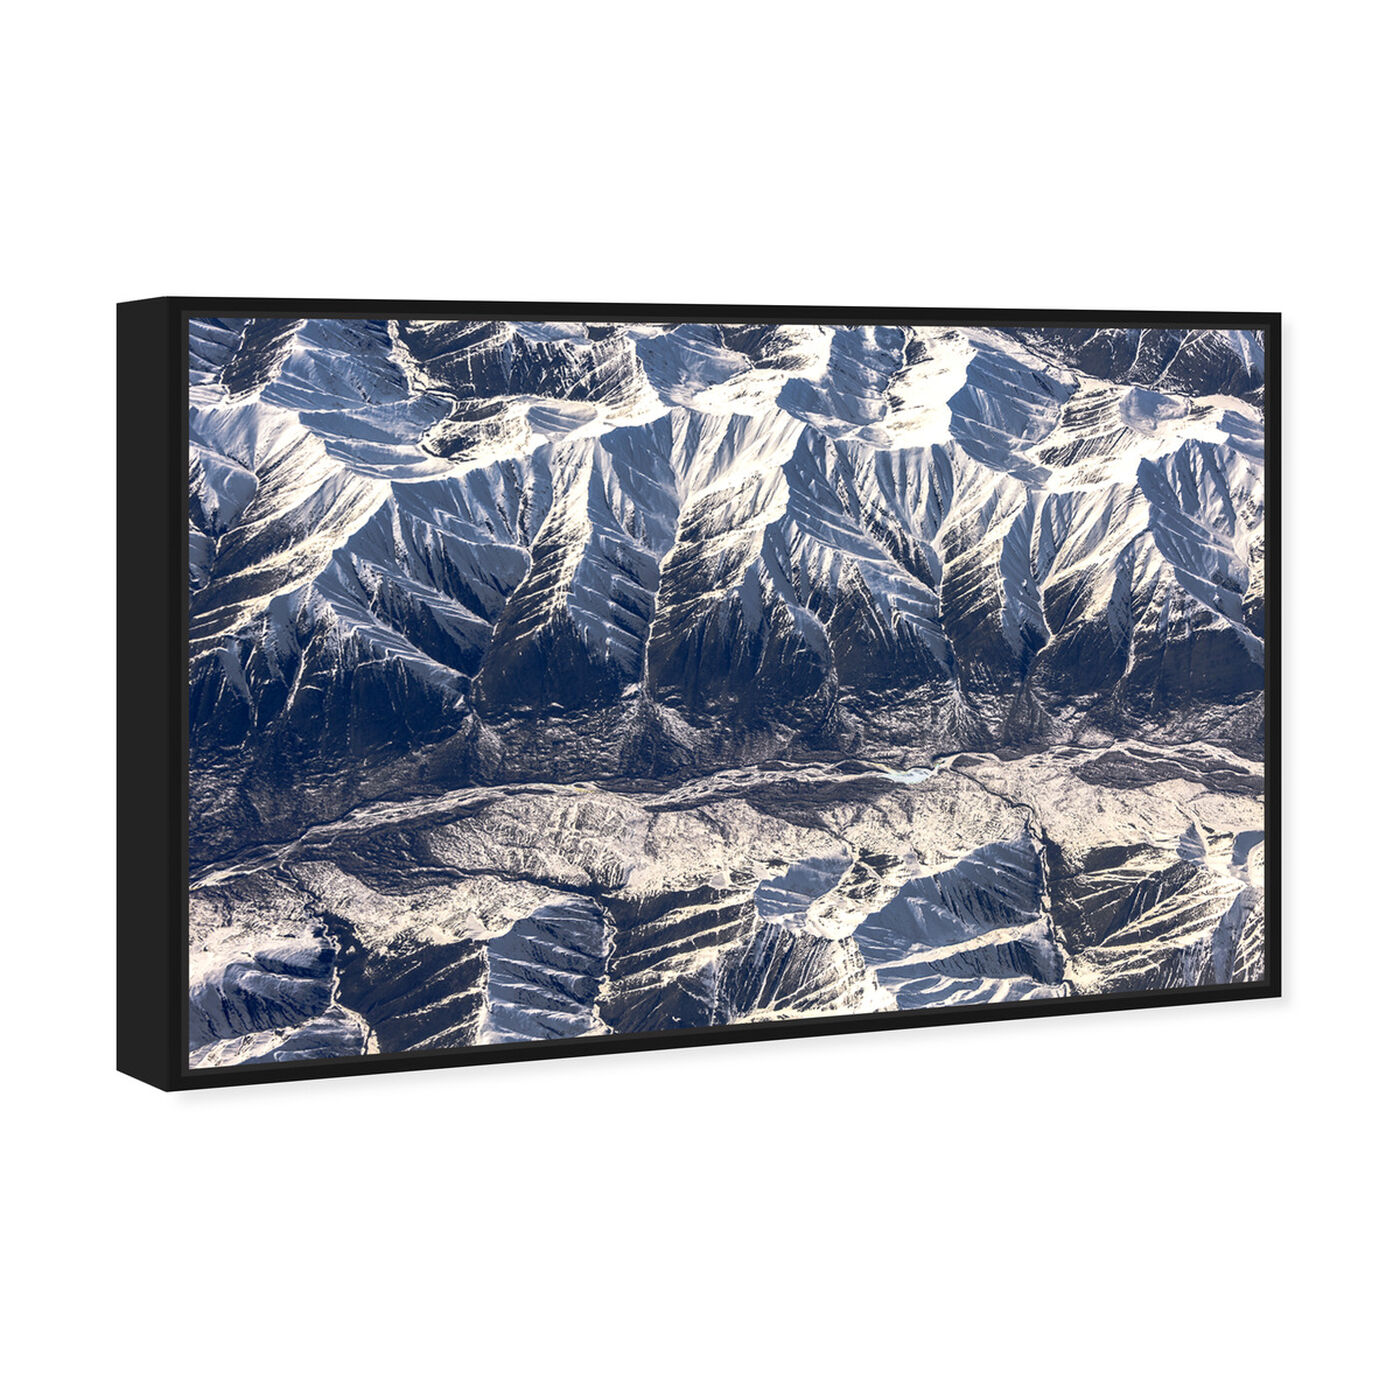 Angled view of Curro Cardenal - Aero View II featuring nature and landscape and mountains art.